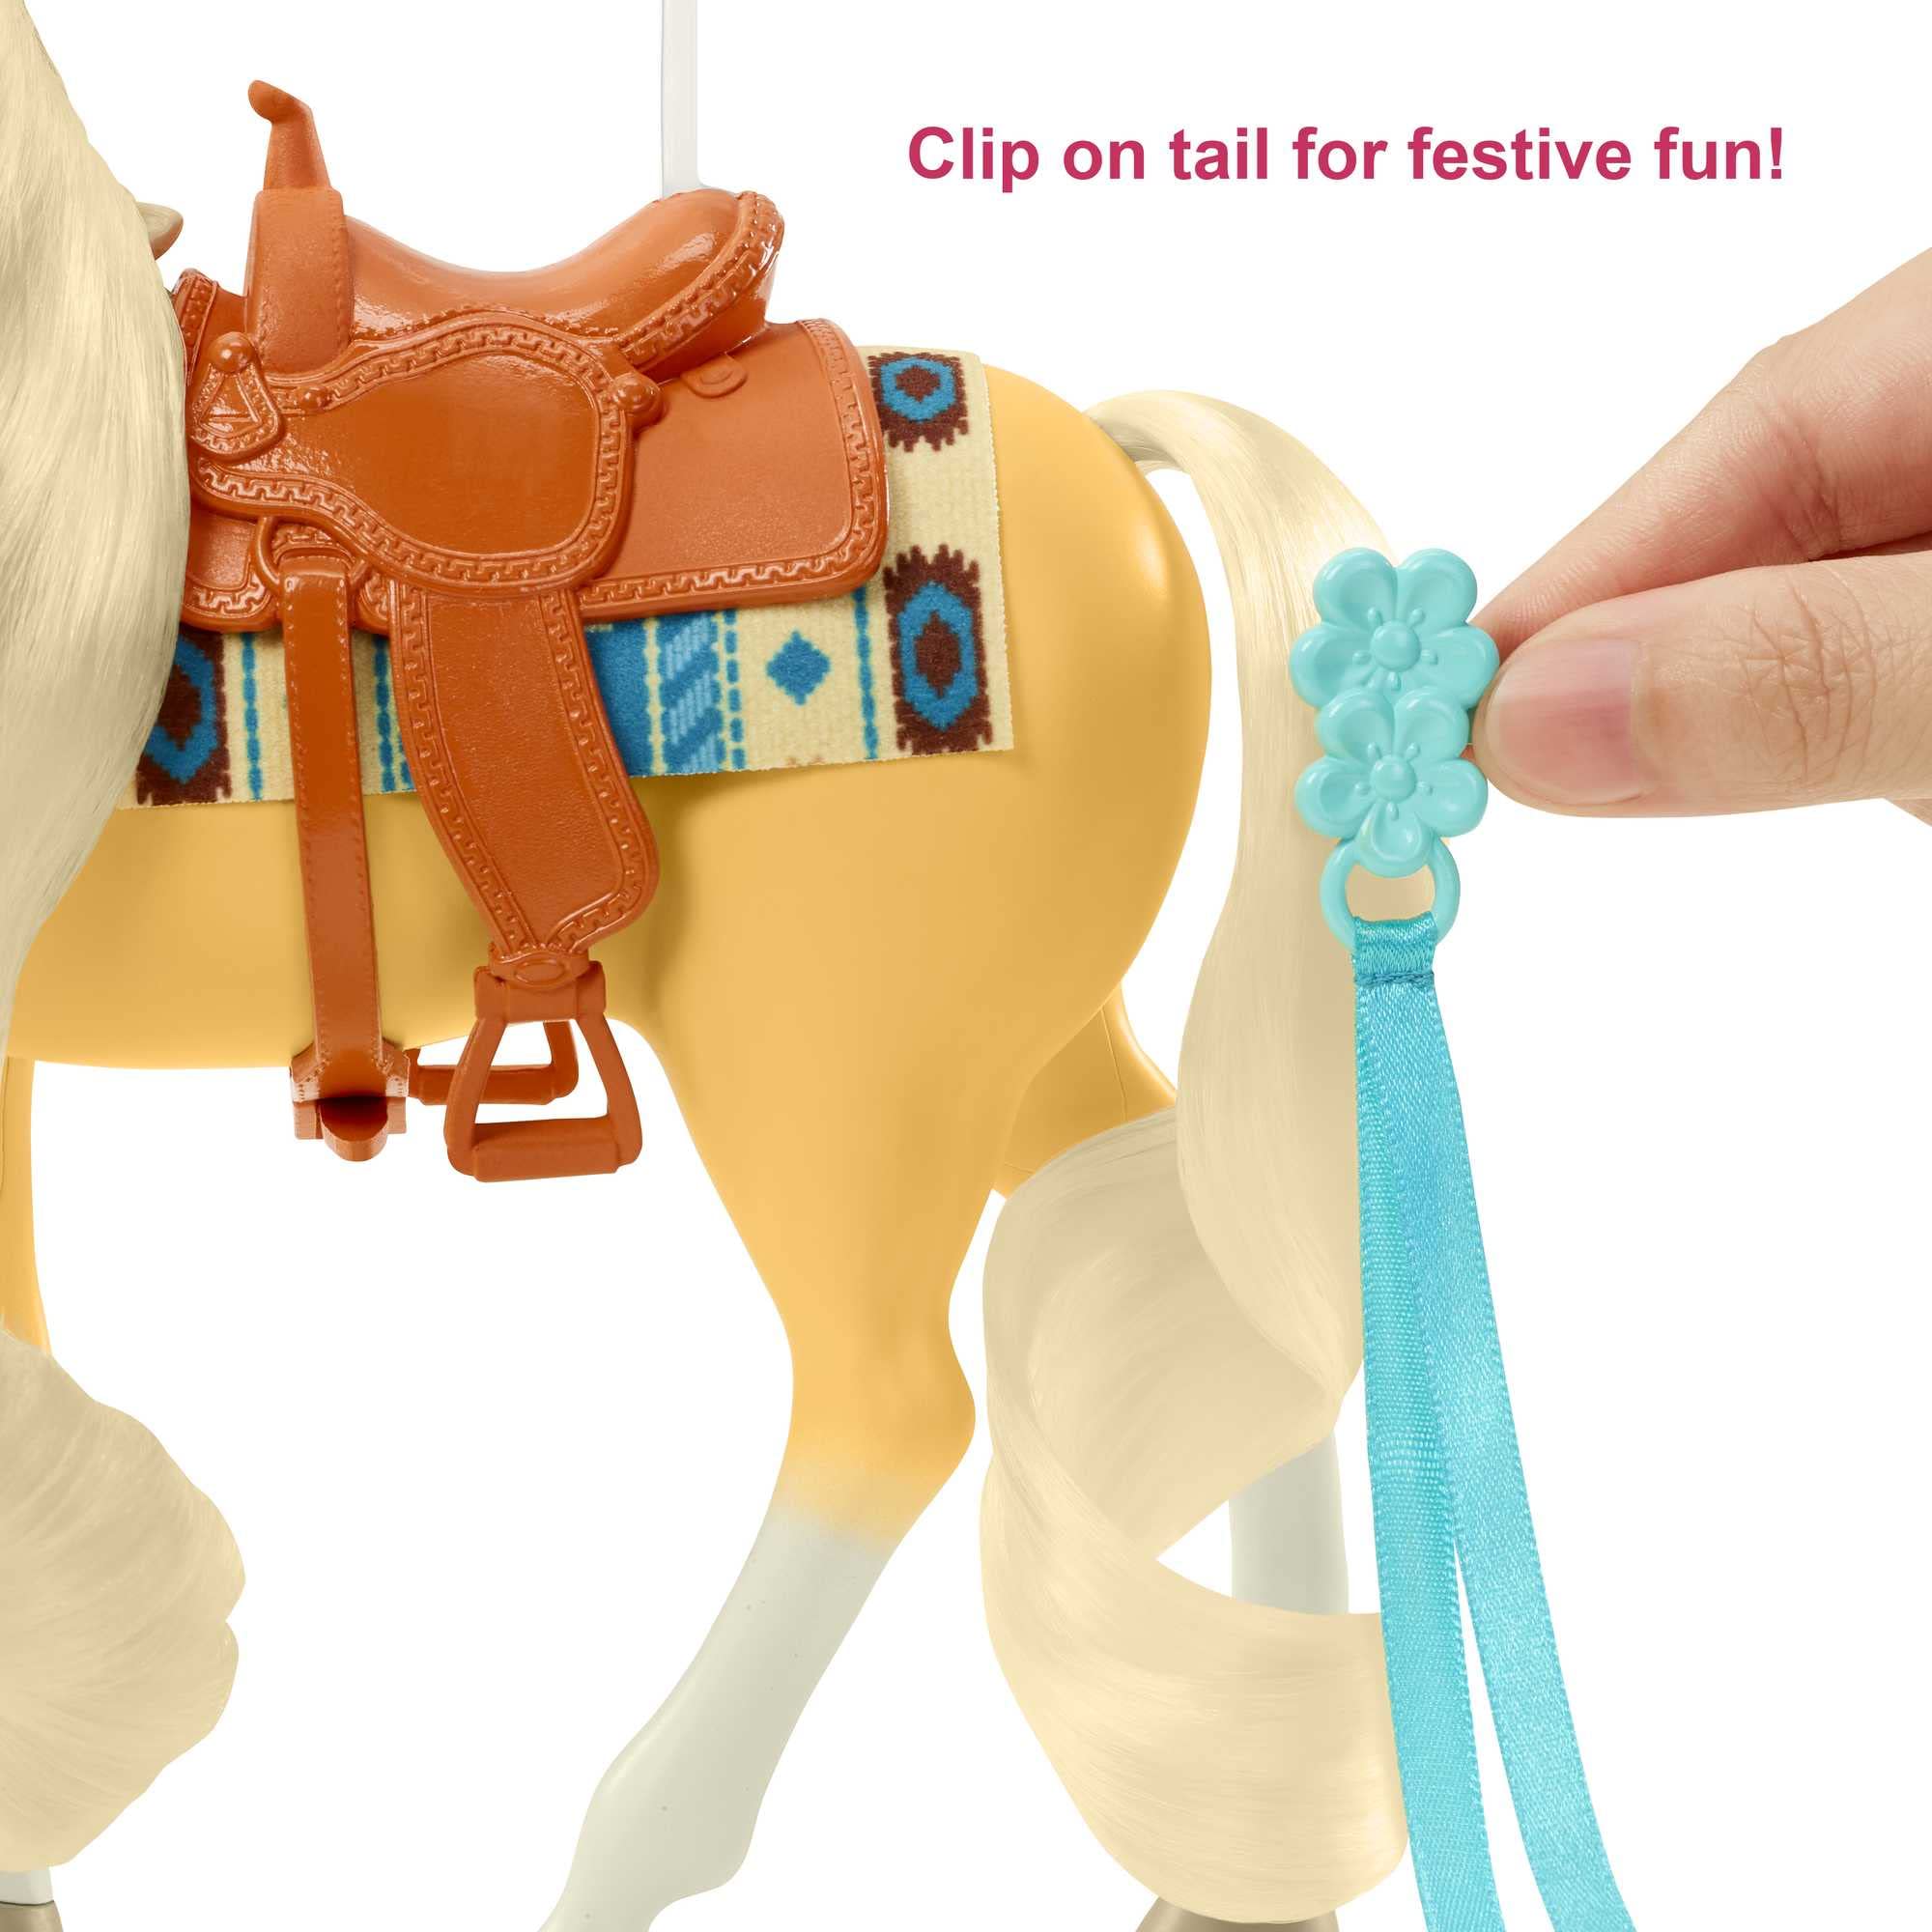 Mattel Spirit Untamed Miradero Festival Styling Chica Linda Horse (8-in) with Long Mane and Tail & Hair Play Accessories, Great Gift for Ages 3 Years Old & Up